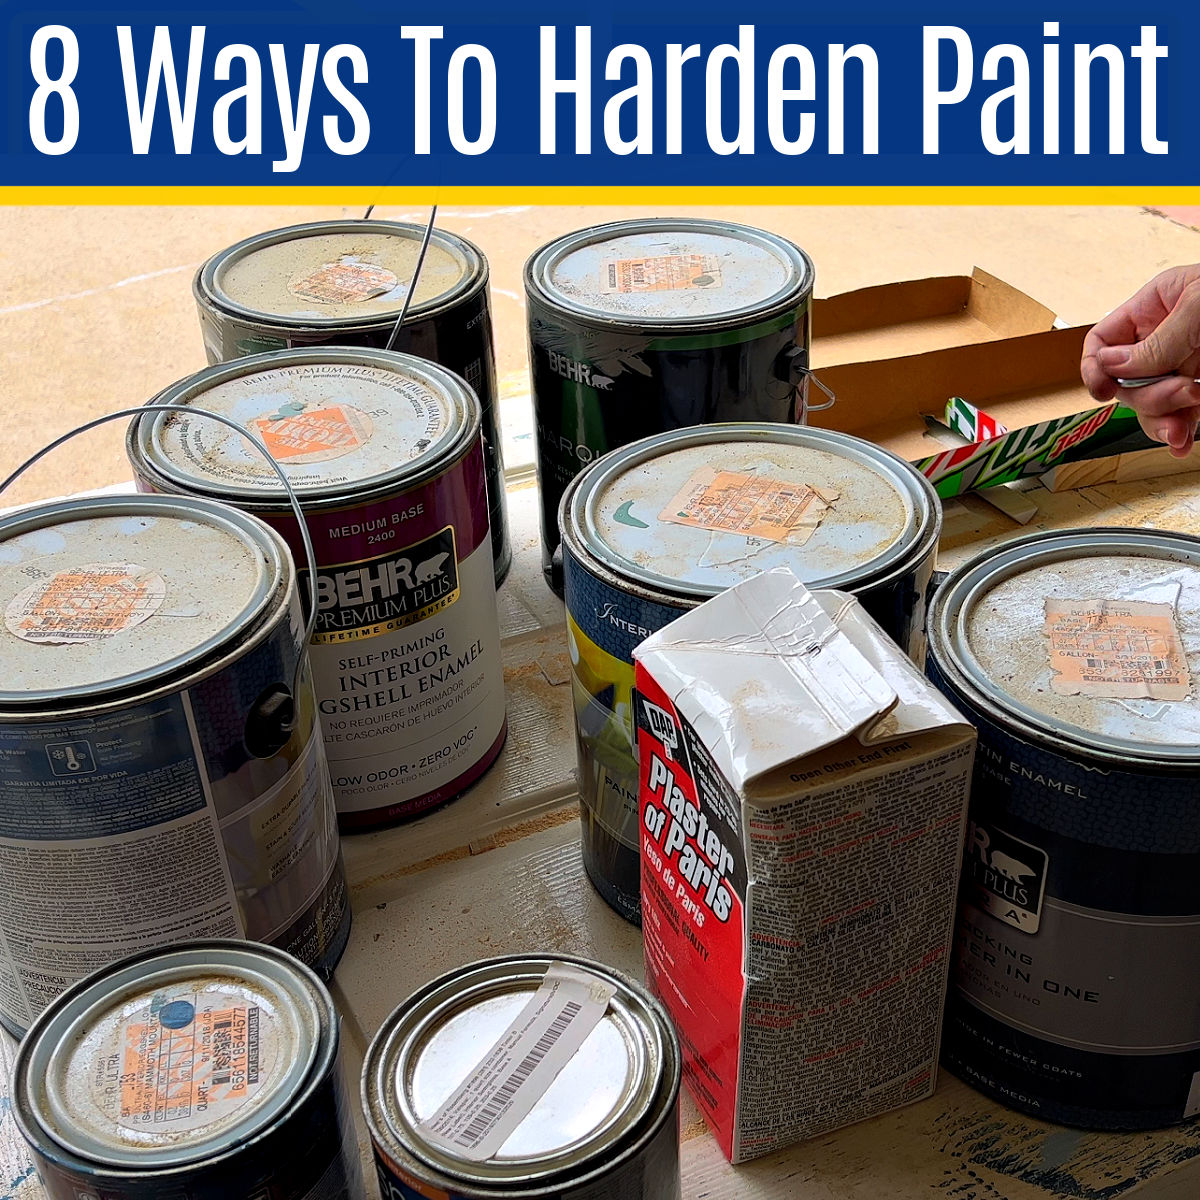 How Do I Dispose of Paint?